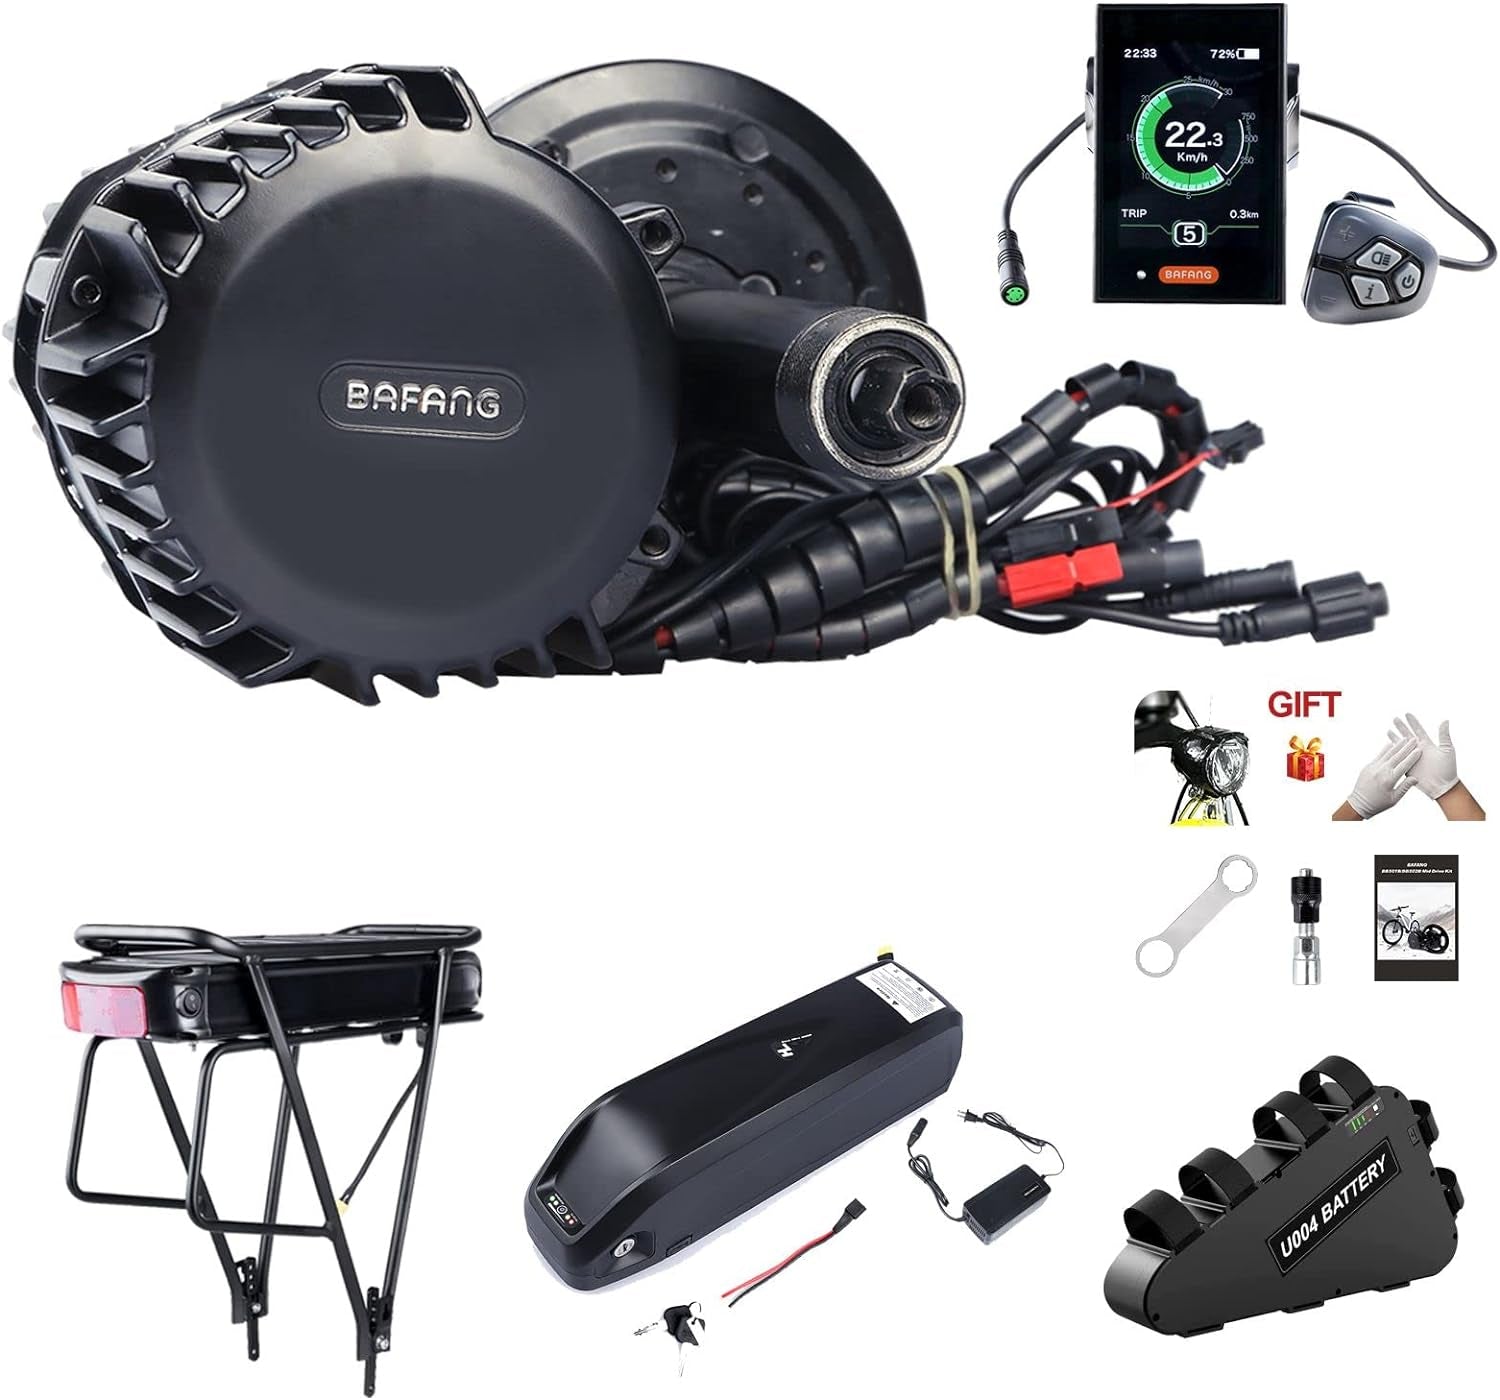 BBS02 48V 750W Bb100Mm Mid Drive Kit with Battery (Optional), 8Fun Bicycle Motor Kit with LCD Display & Chainring, Electric Brushless Bike Motor Motor